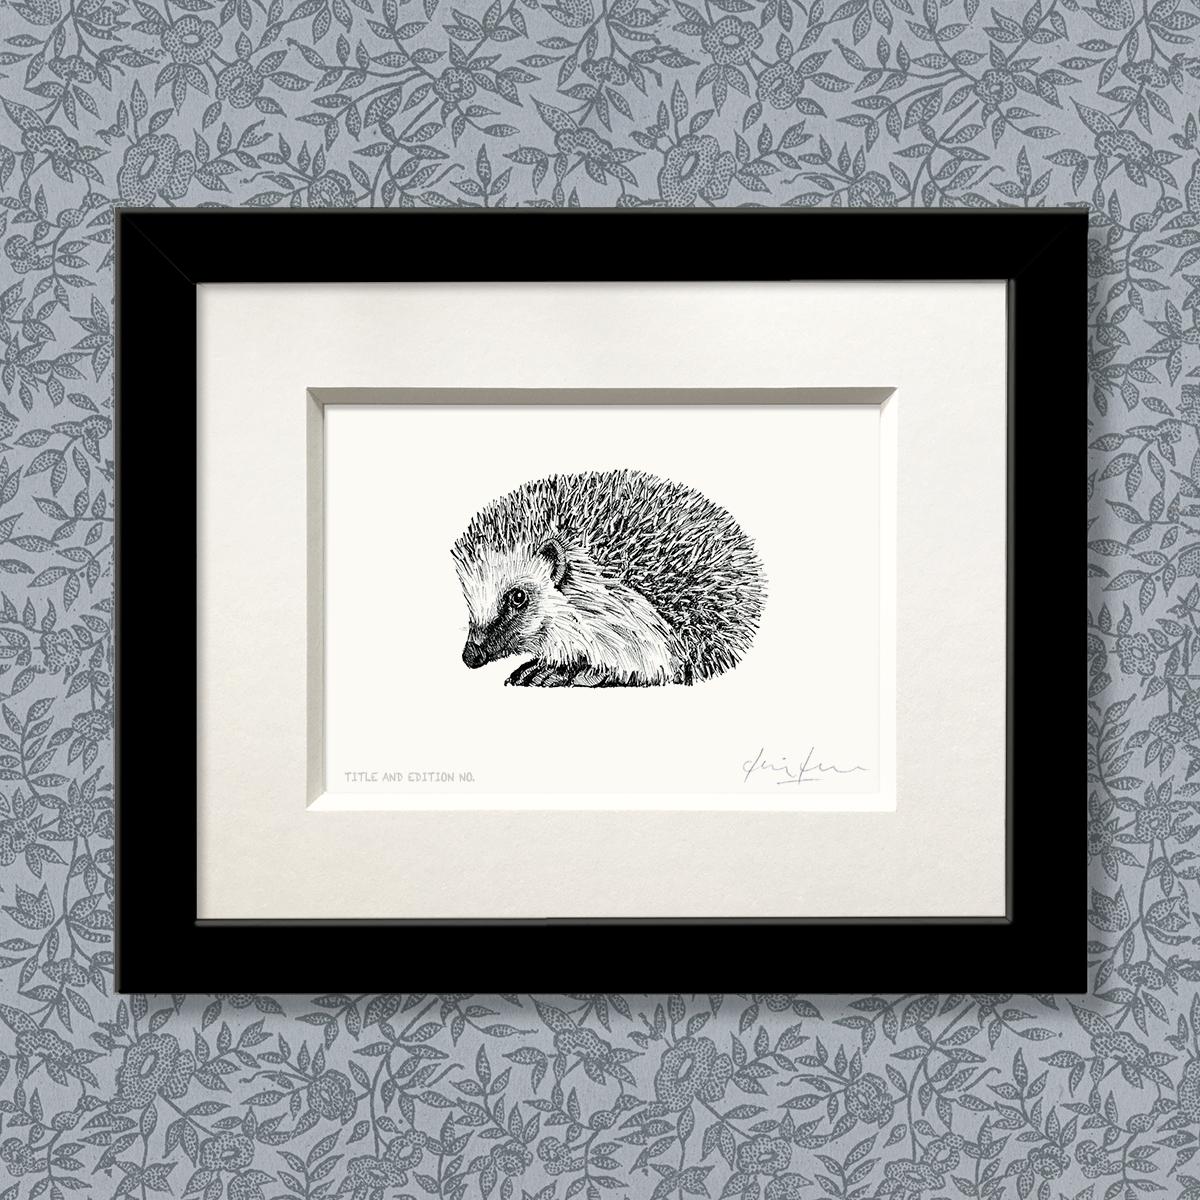 Limited edition print from pen and ink drawing of a hedgehog in a black frame